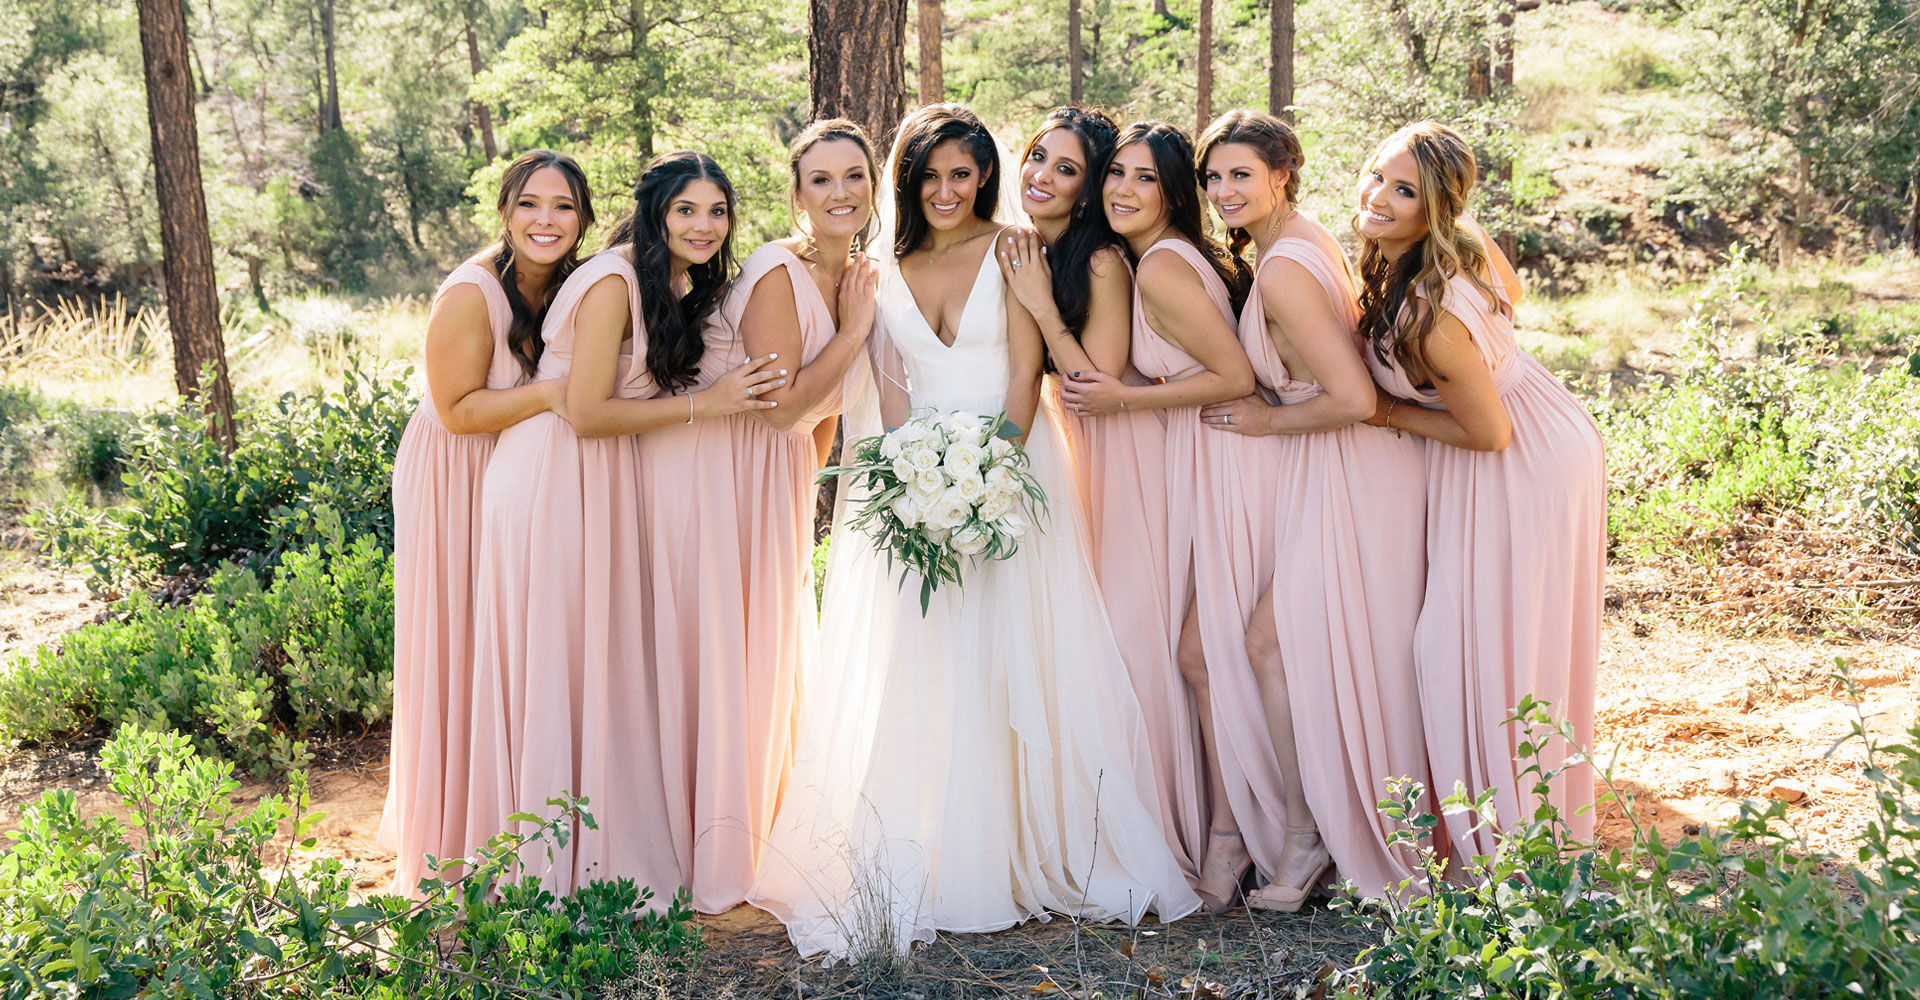 Wedding party at the Cabins on Strawberry Hill outdoor wedding venue in Arizona